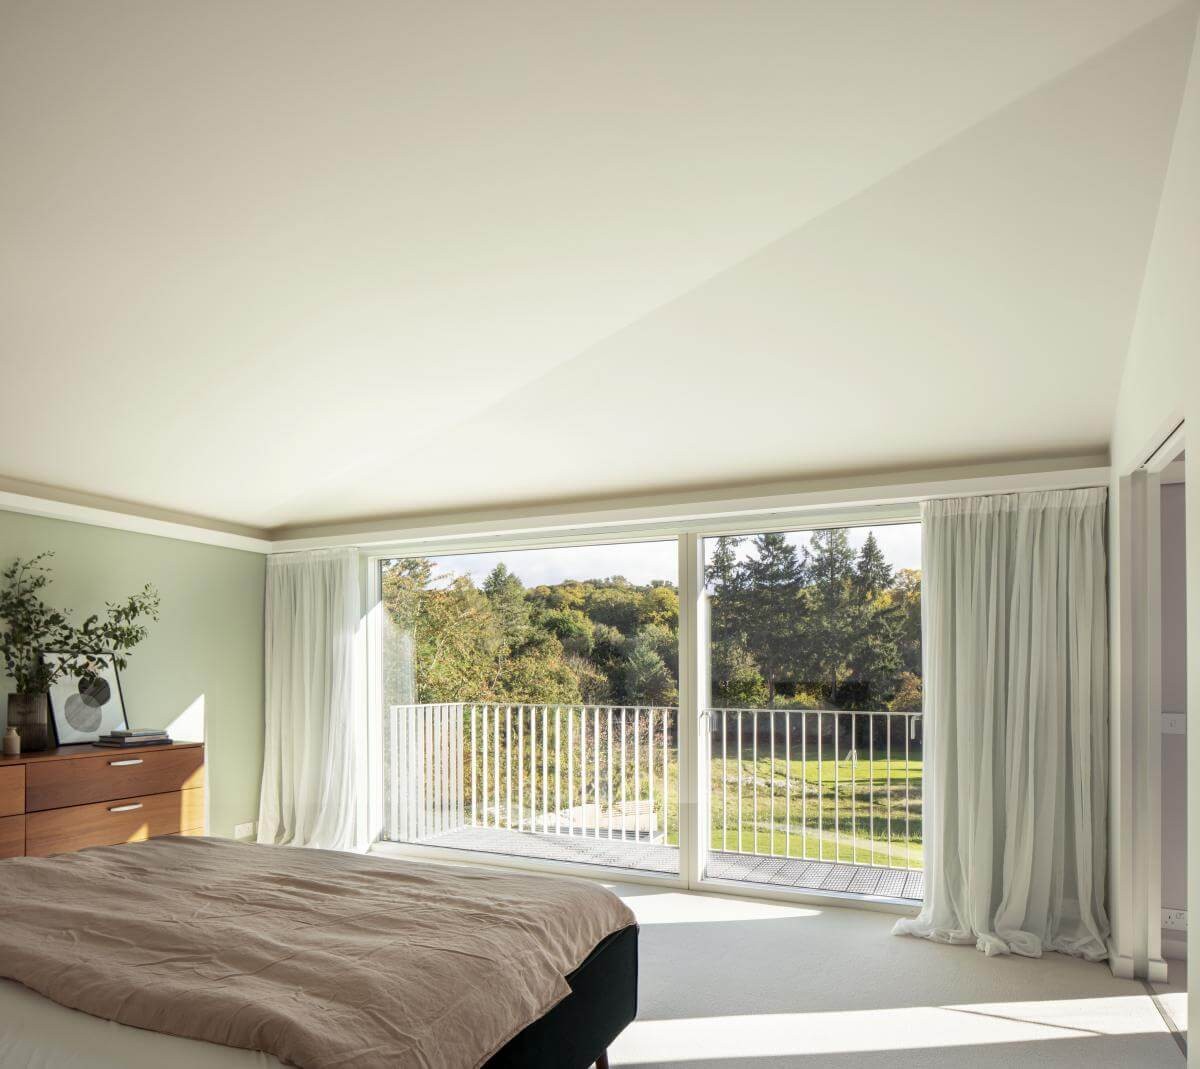 copy of 28 cherry tree house master bedroom and balcony guttfield architecture will scott